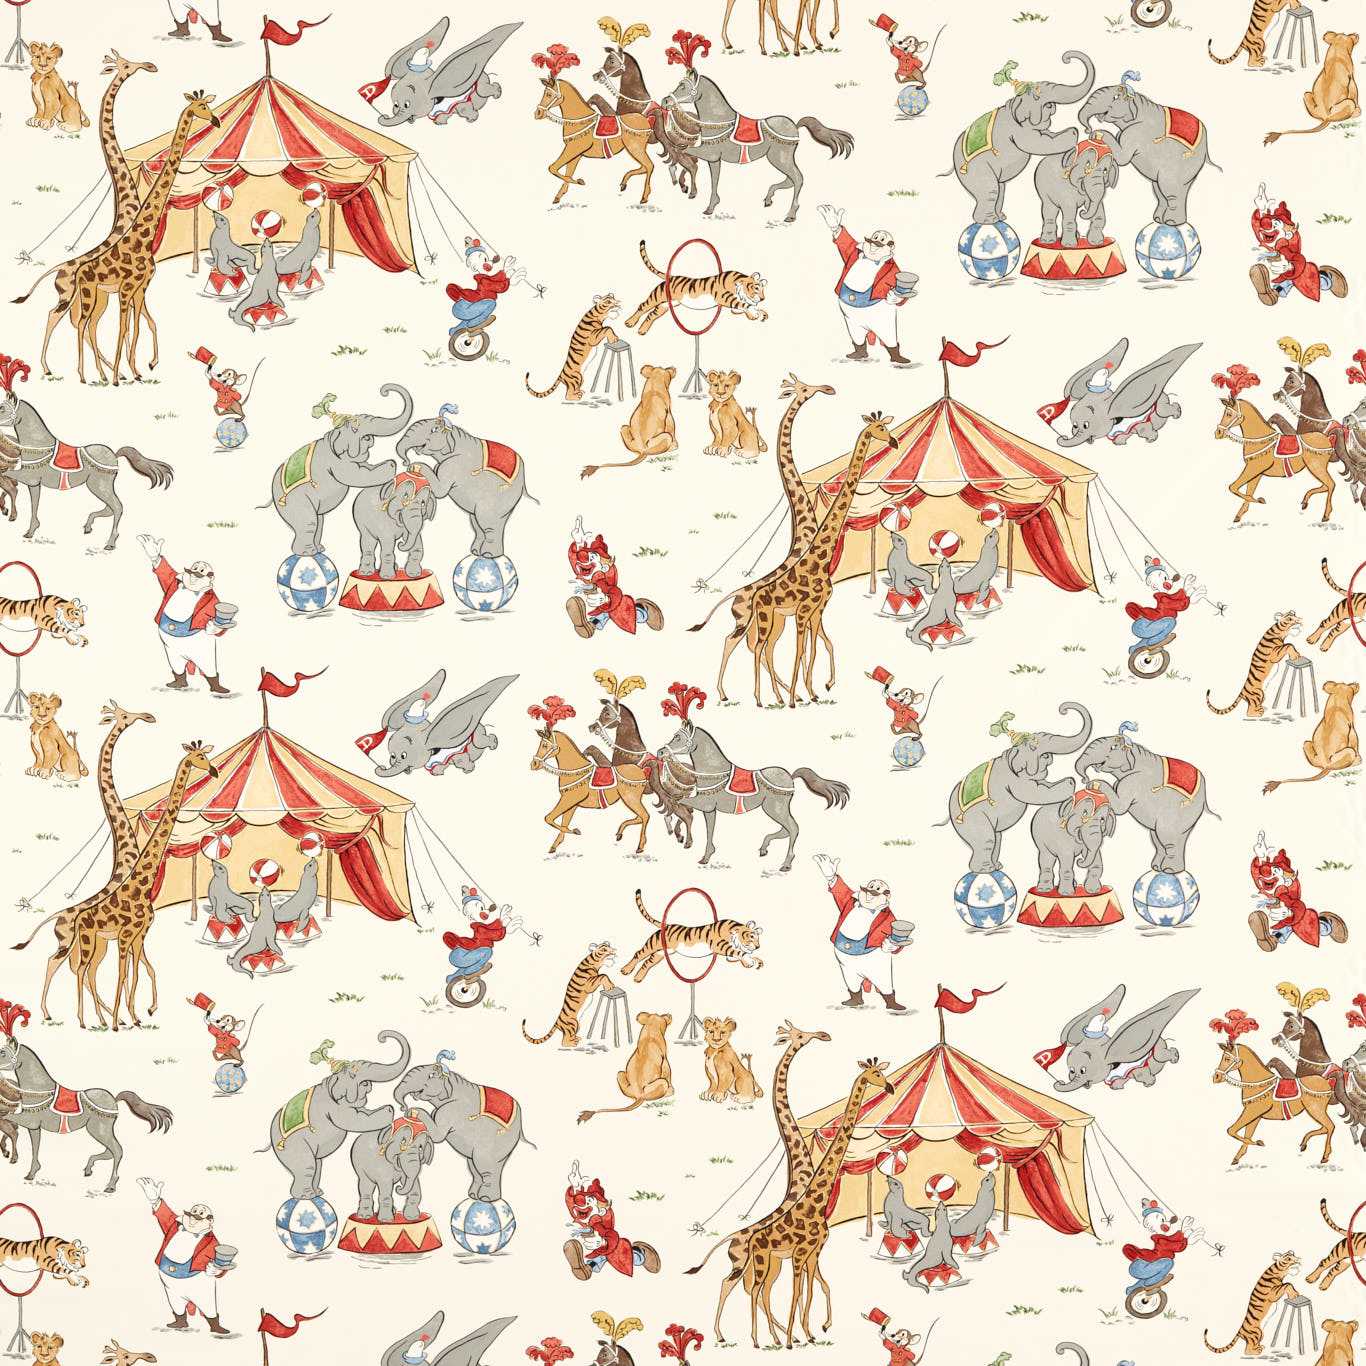 Dumbo Peanut Butter & Jelly Fabric by SAN